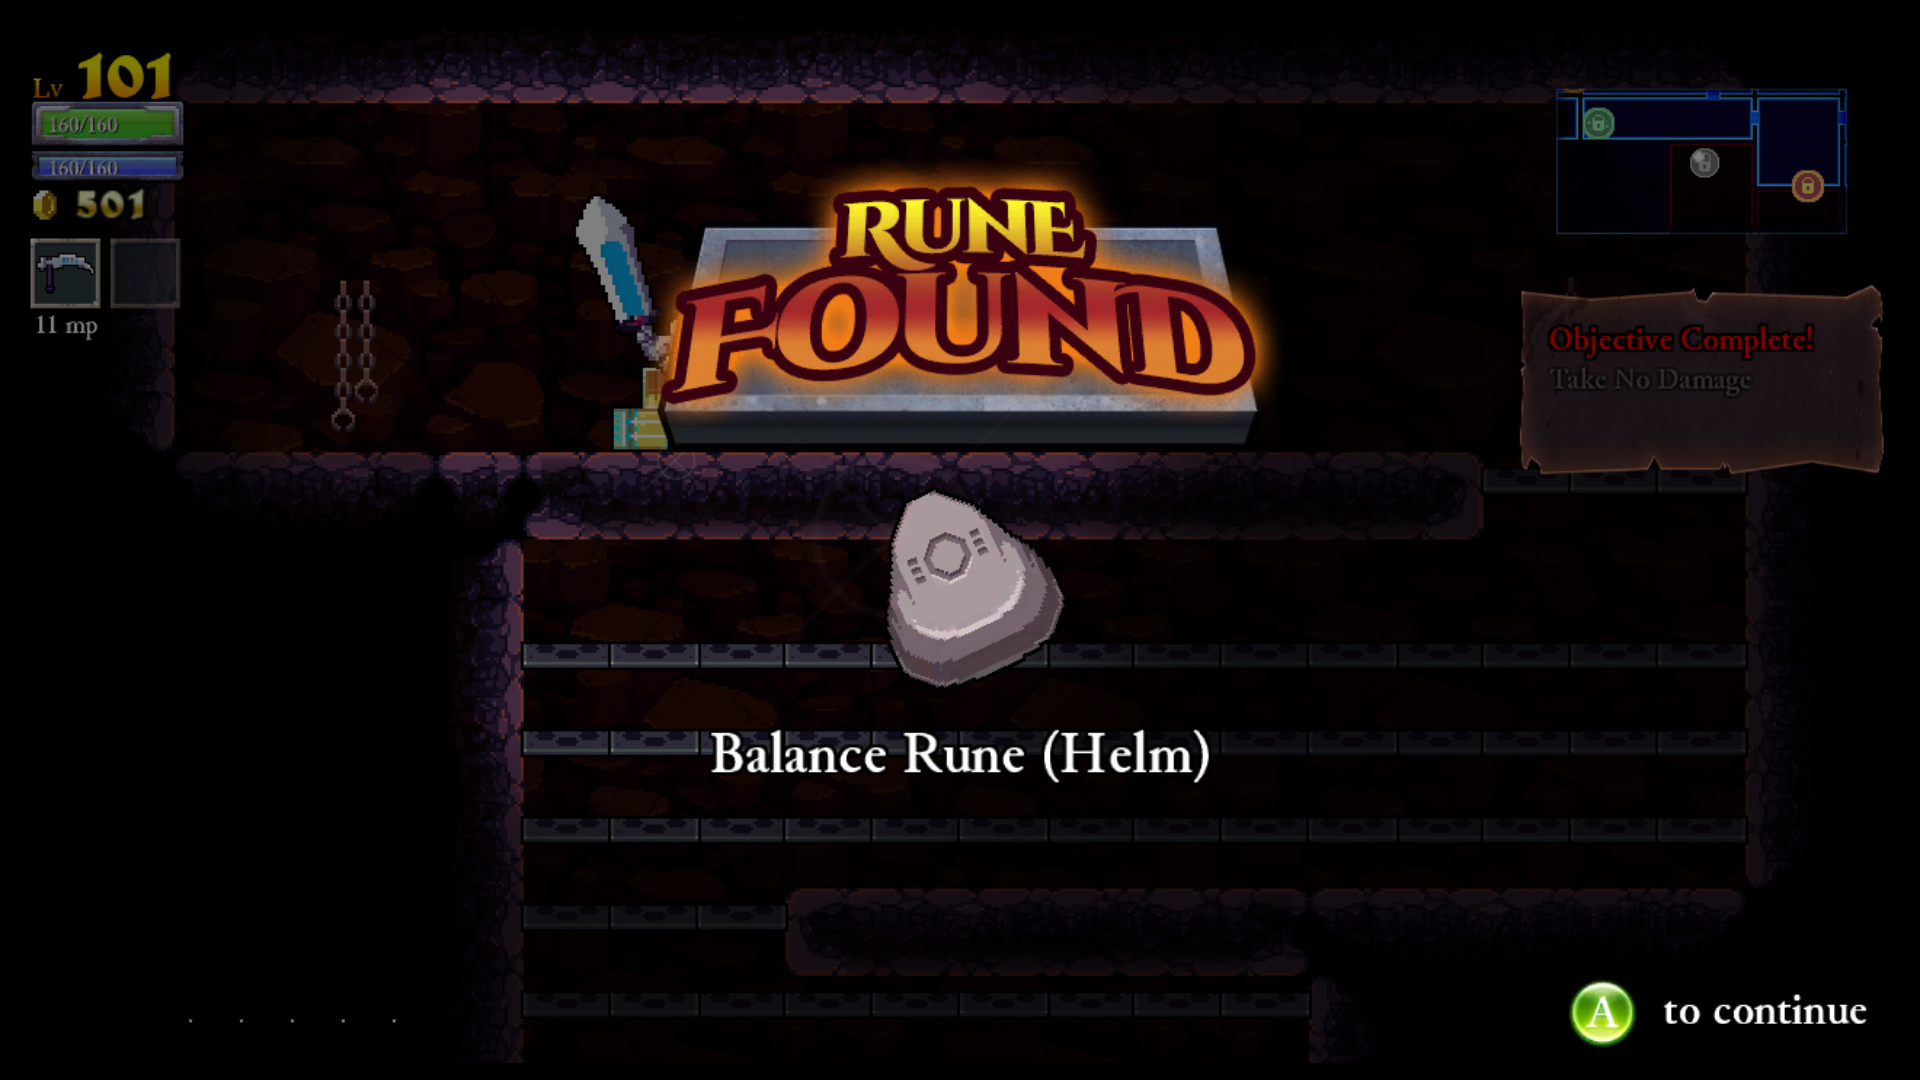 RogueLegacy 2013-06-19 00-55-51-193.png